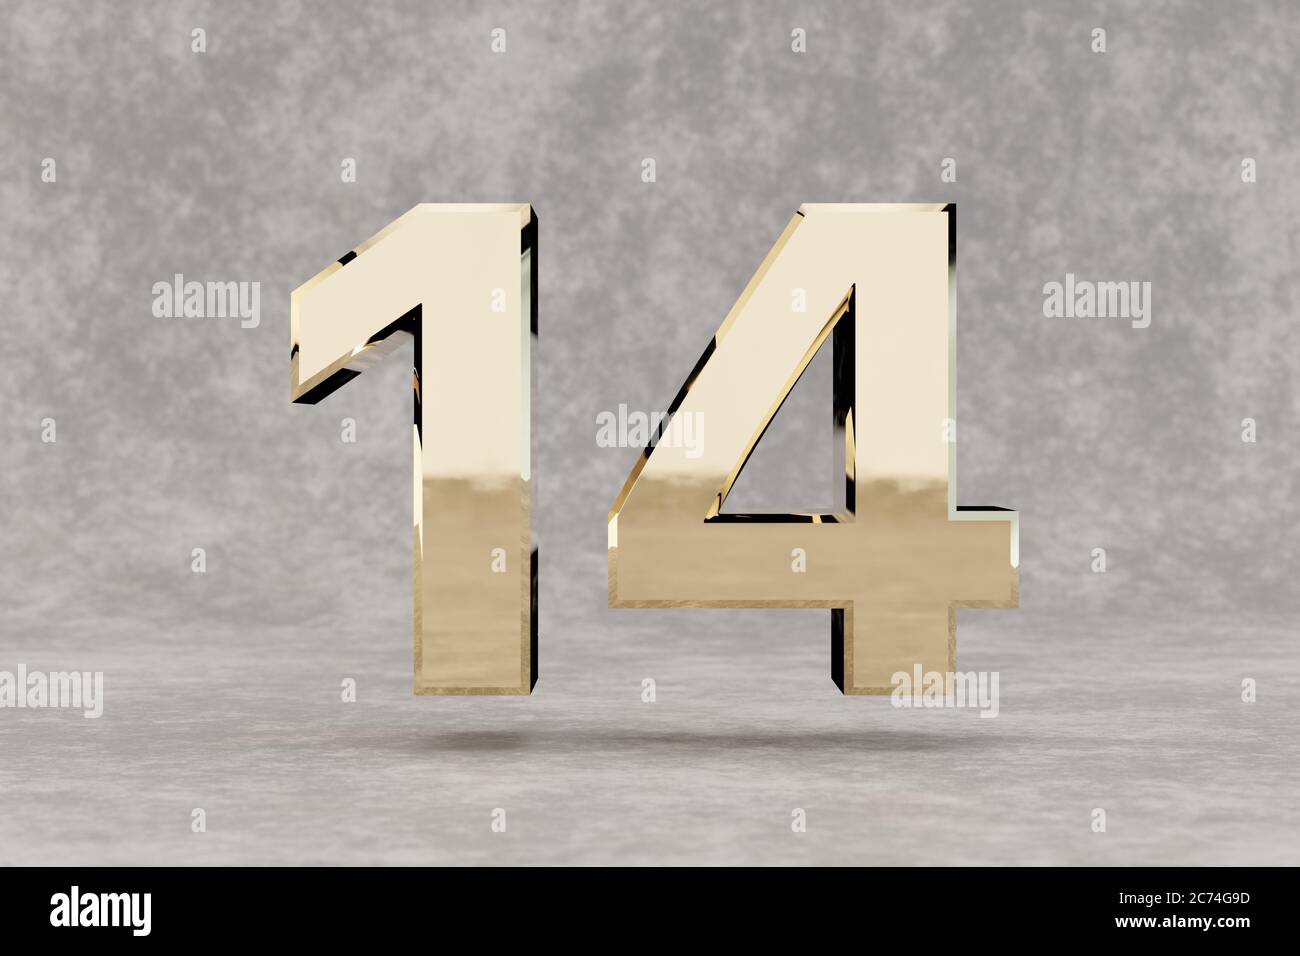 Gold 3d number 14. Glossy golden number on concrete background. Metallic digit with studio light reflections. 3d render. Stock Photo